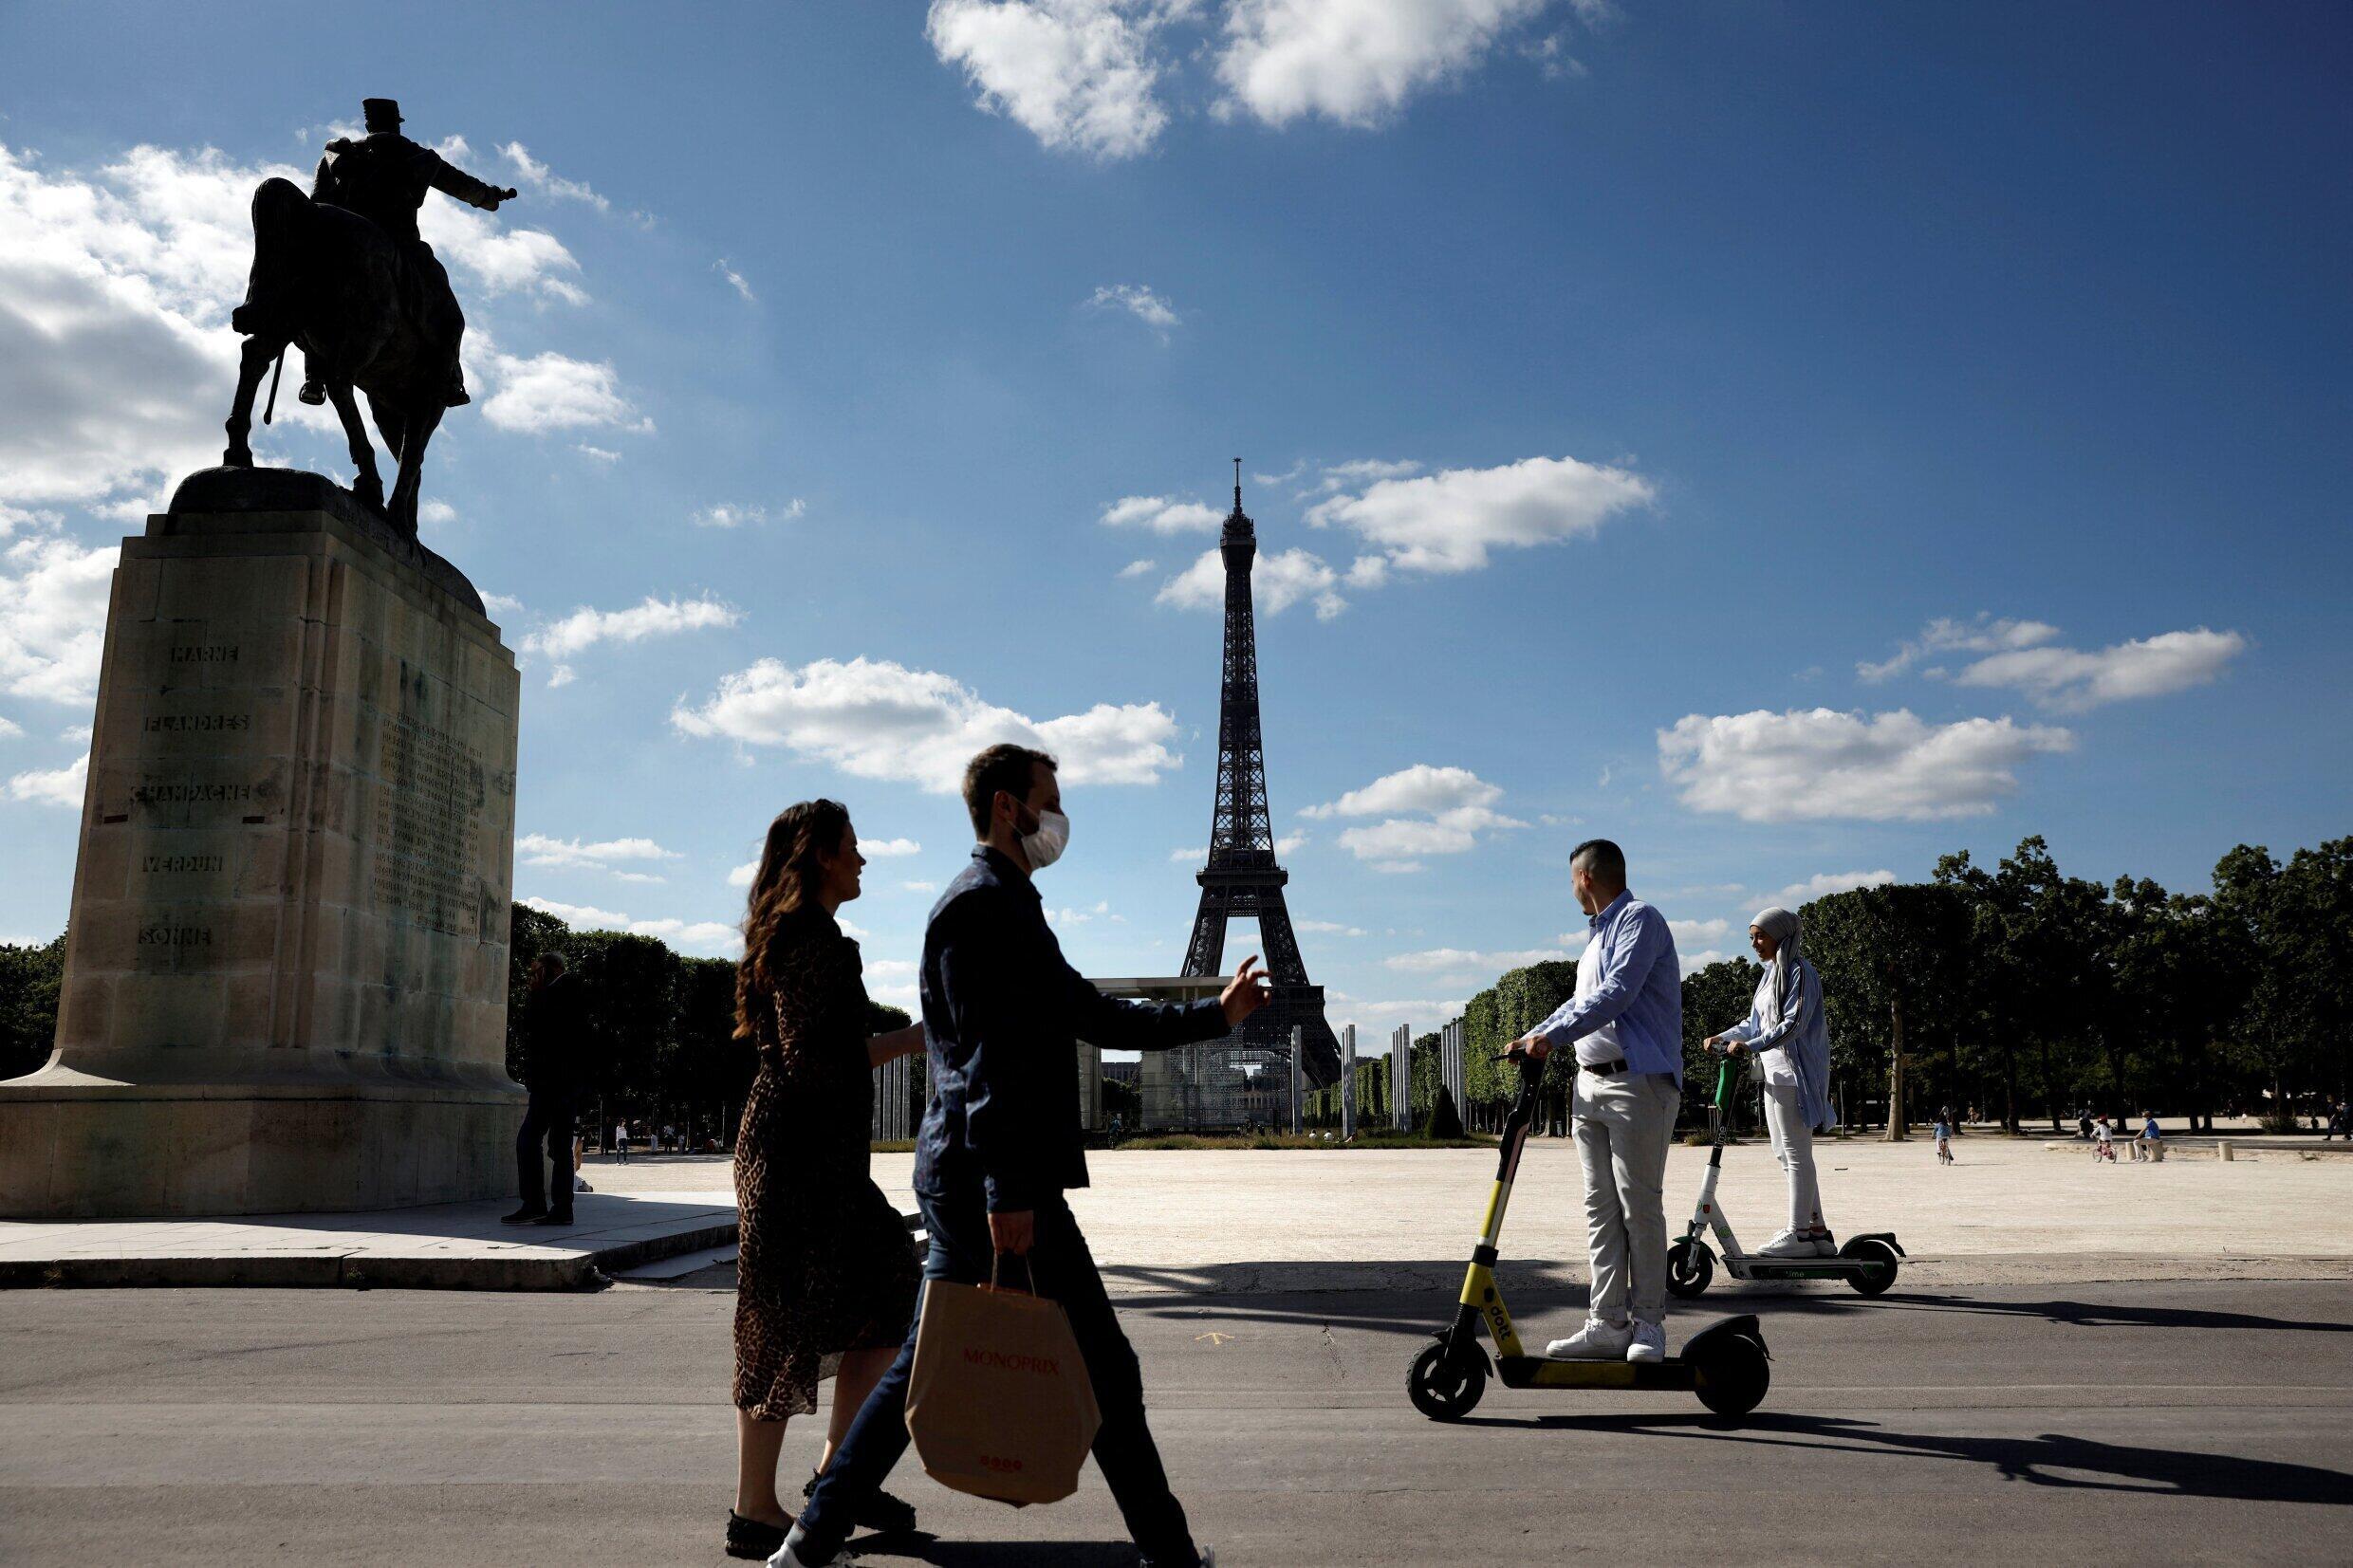 Self-service e-scooters were banished from the streets of Paris after a public consultation marked by record-low turnout.